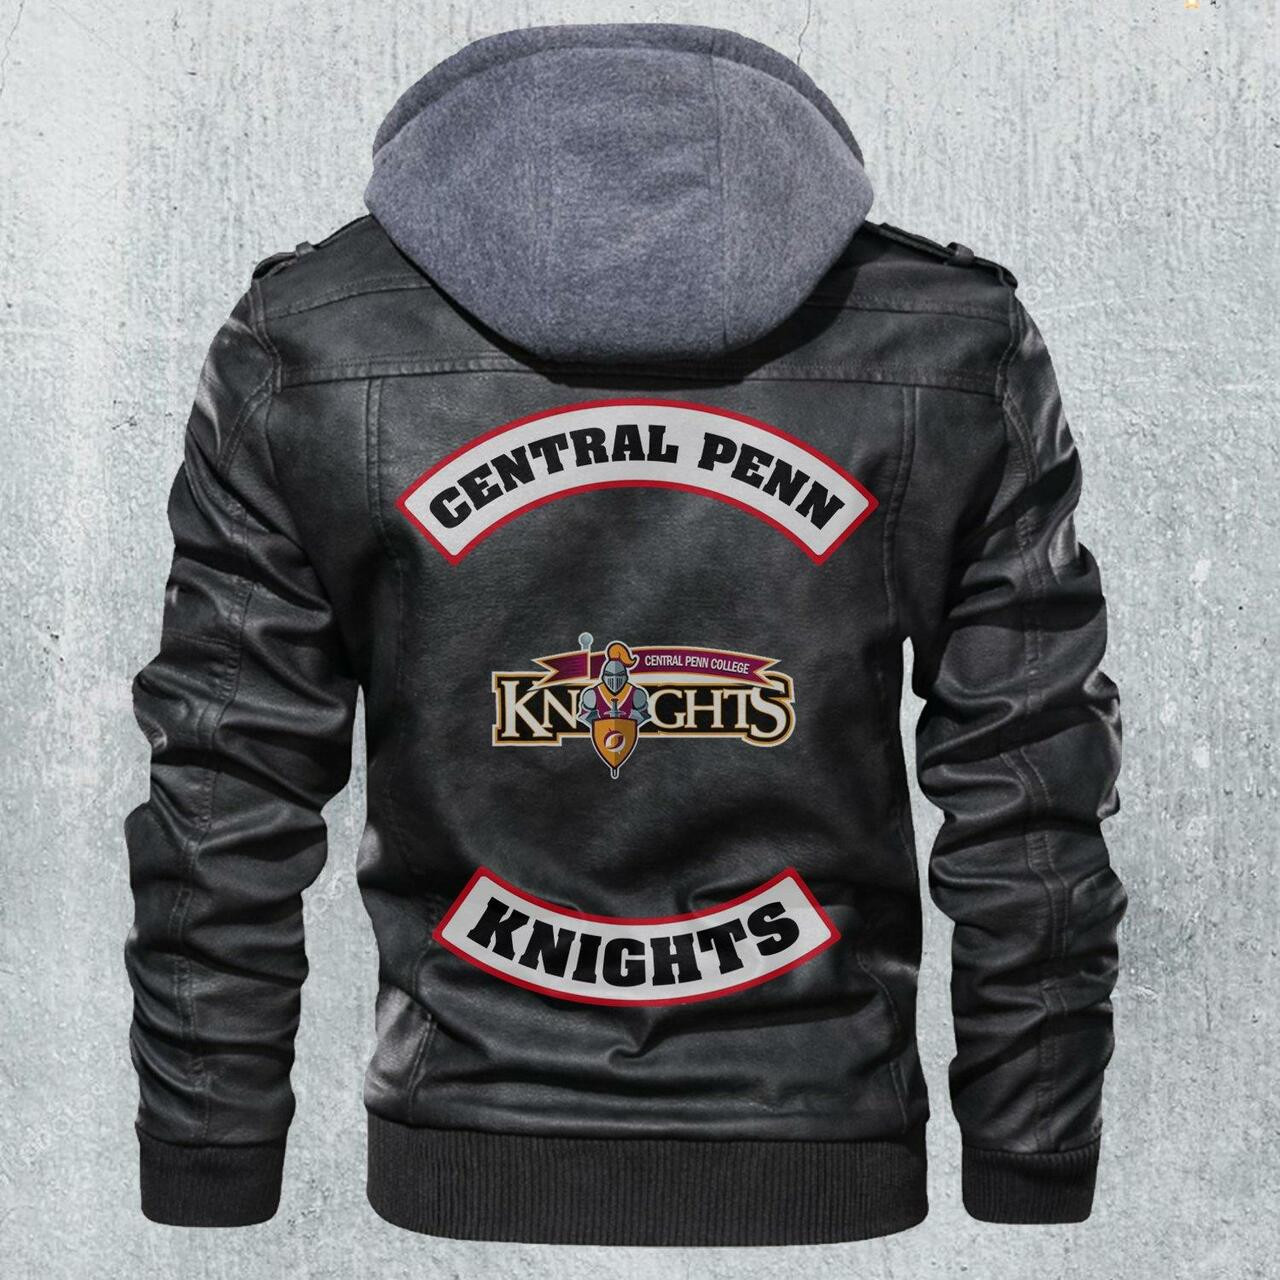 Check out our collection of the latest and greatest leather jacket 153